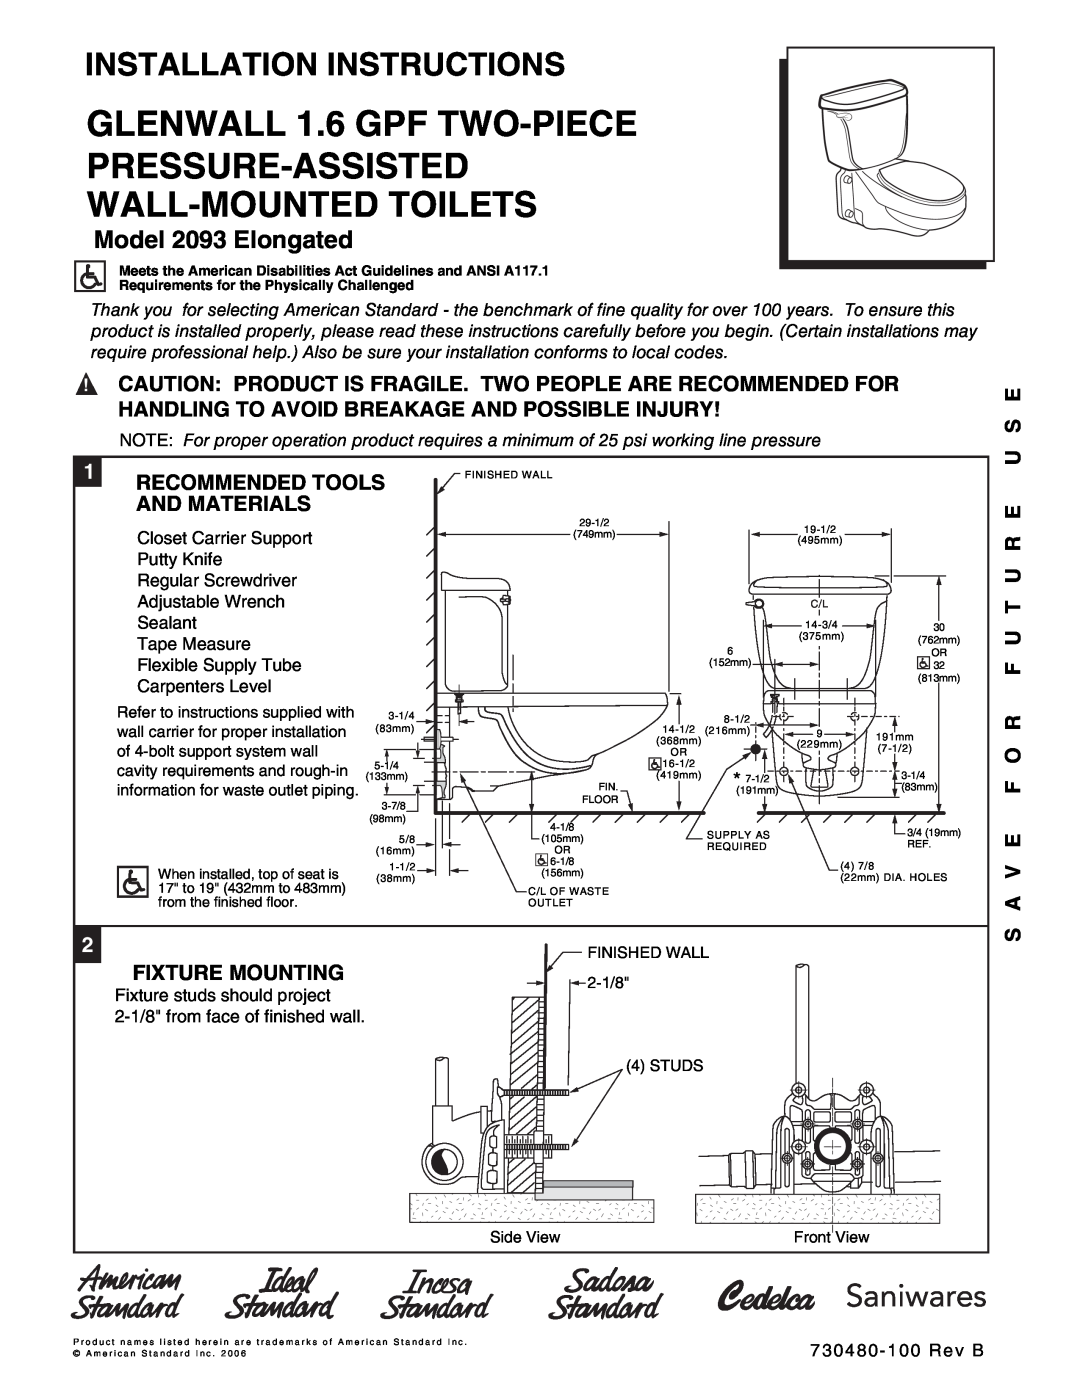 American Standard 2093 Elongated warranty GLENWALL 1.6 GPF TWO-PIECE PRESSURE-ASSISTED, Wall-Mountedtoilets, Saniwares 